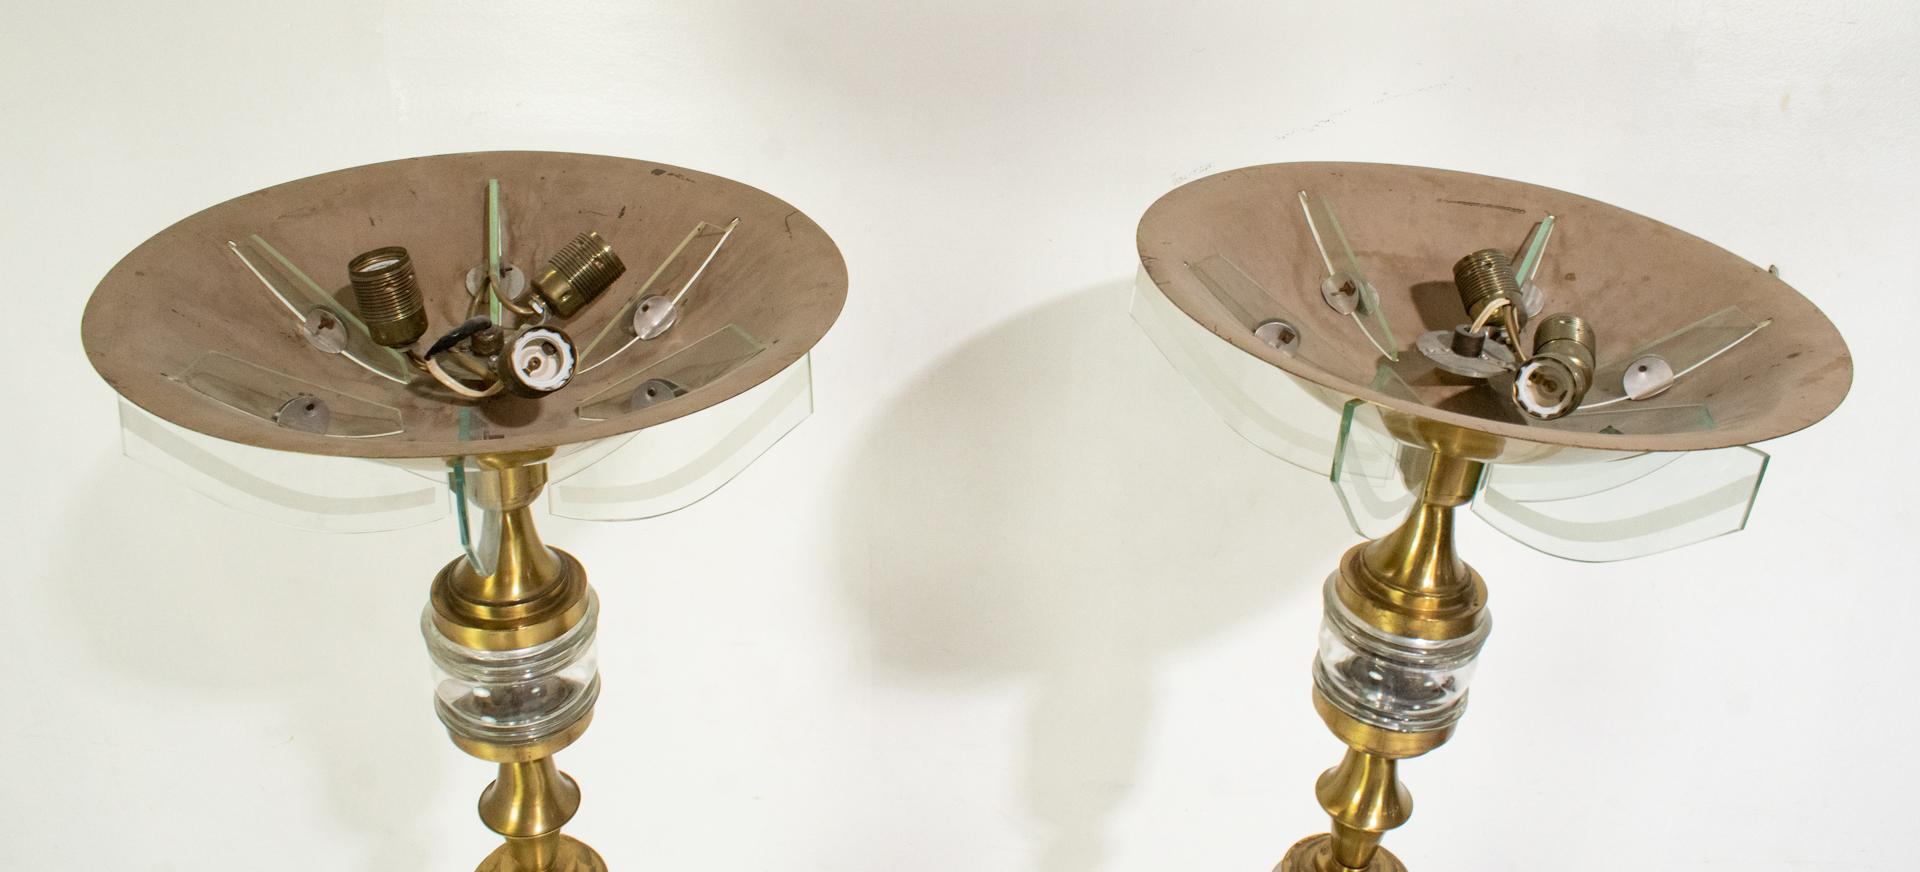 Pair Mid-Century Modern Brass and Glass Floor Lamps In Good Condition For Sale In New York, NY